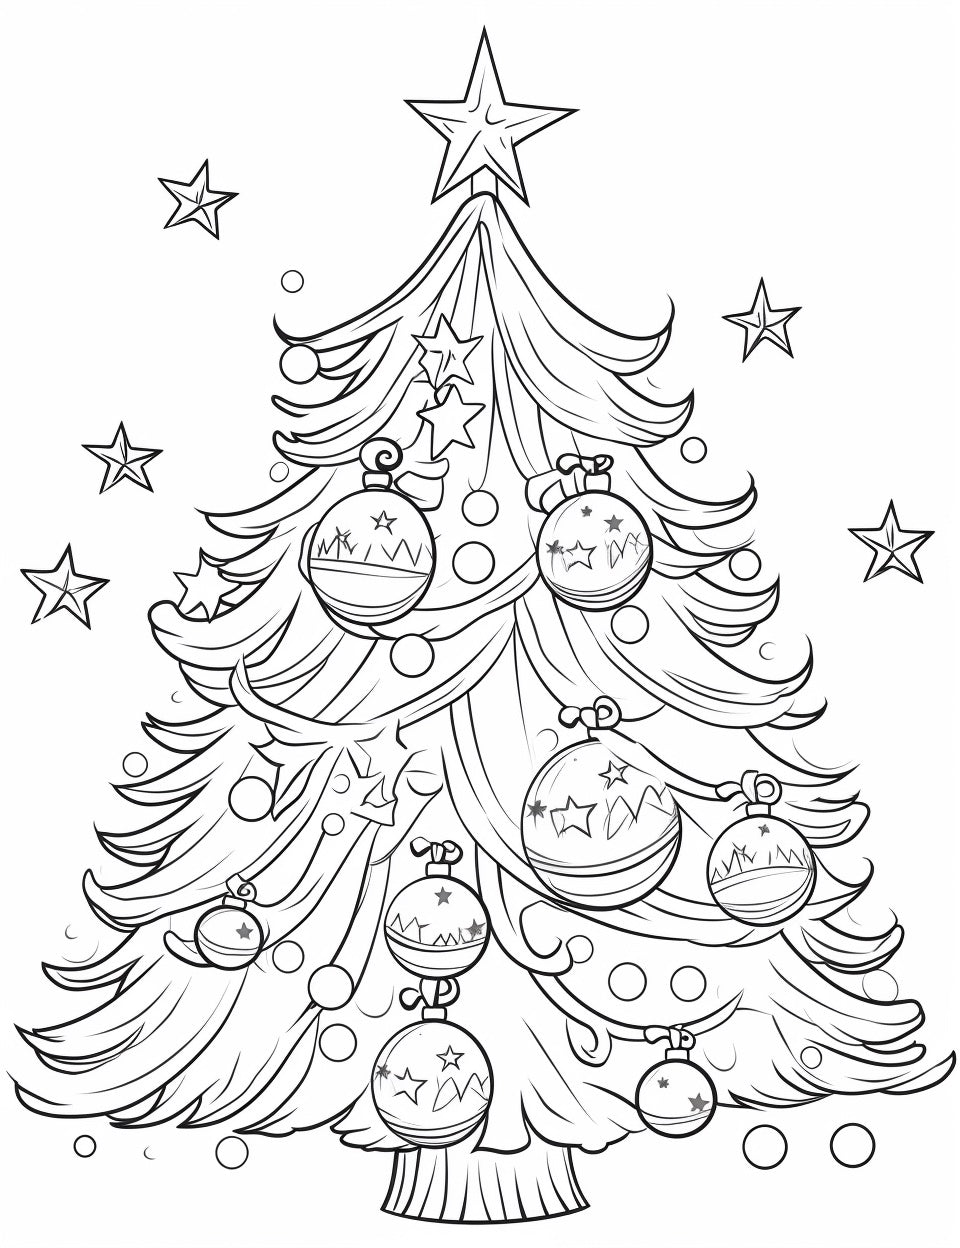 20 Free Coloring Pages of Christmas Trees for Adults and Kids – Bujo Art